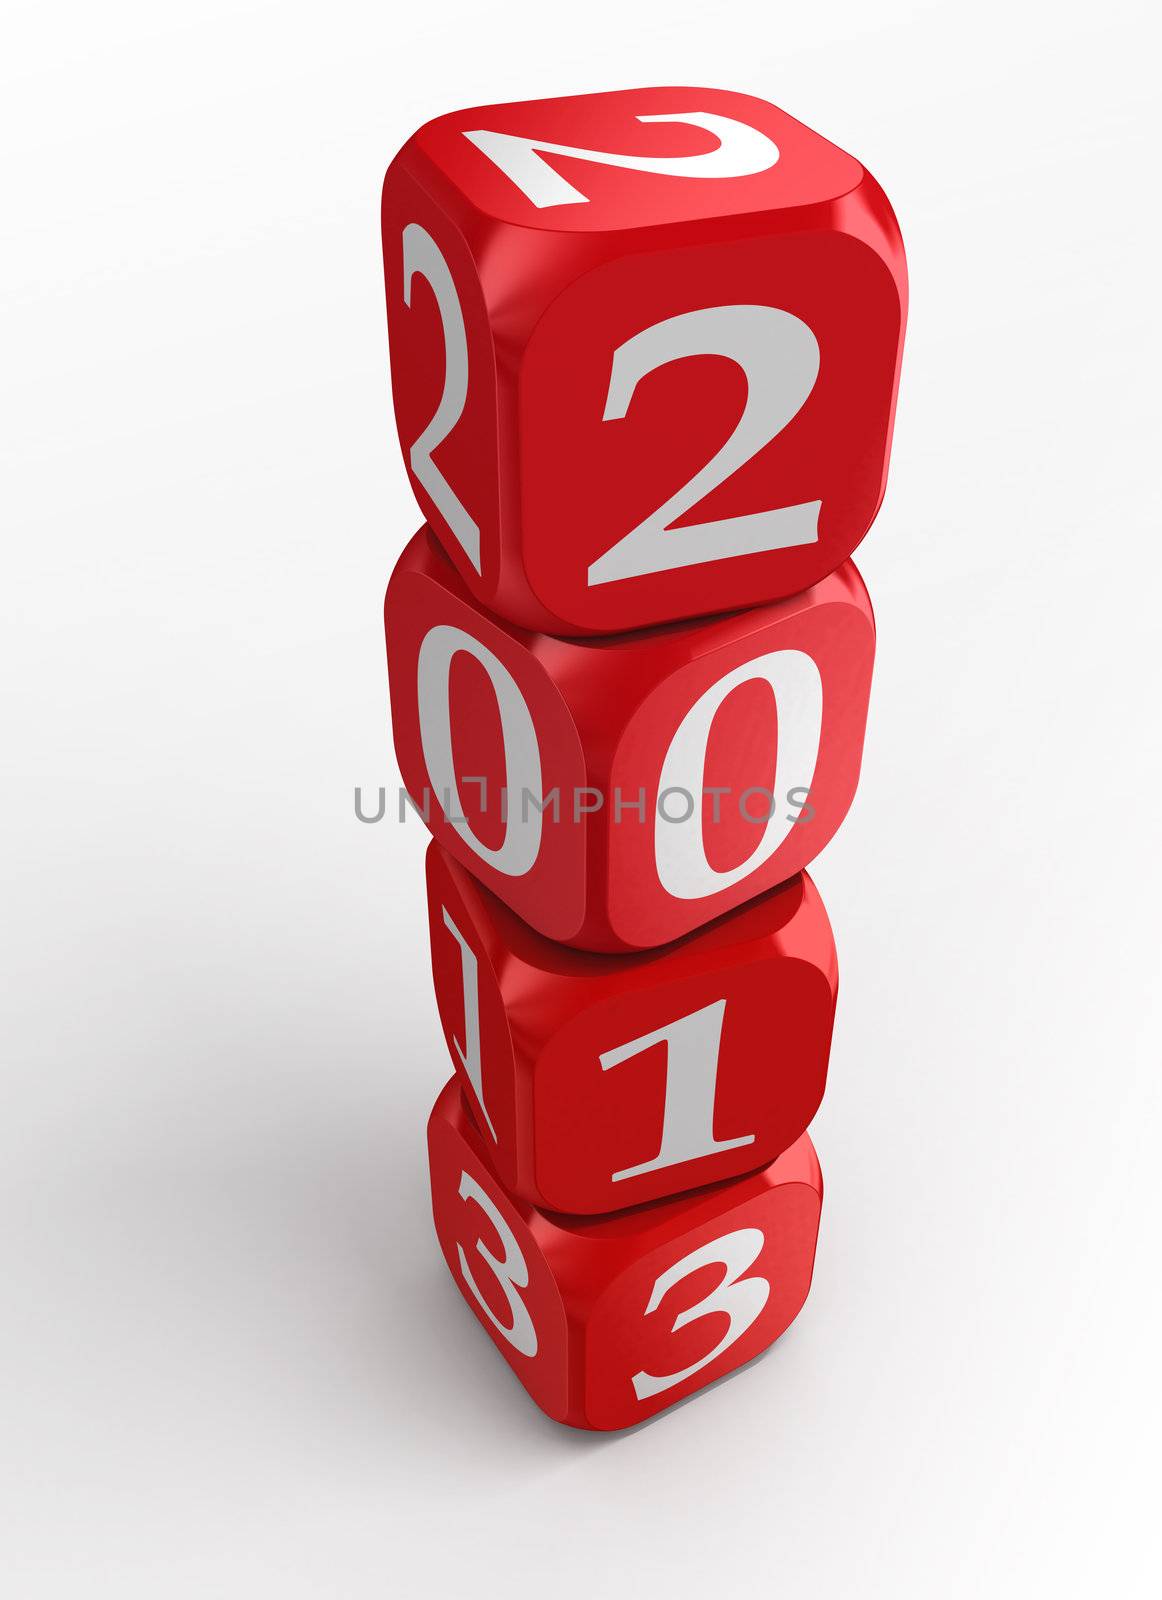 new year 2013 dice tower by donskarpo